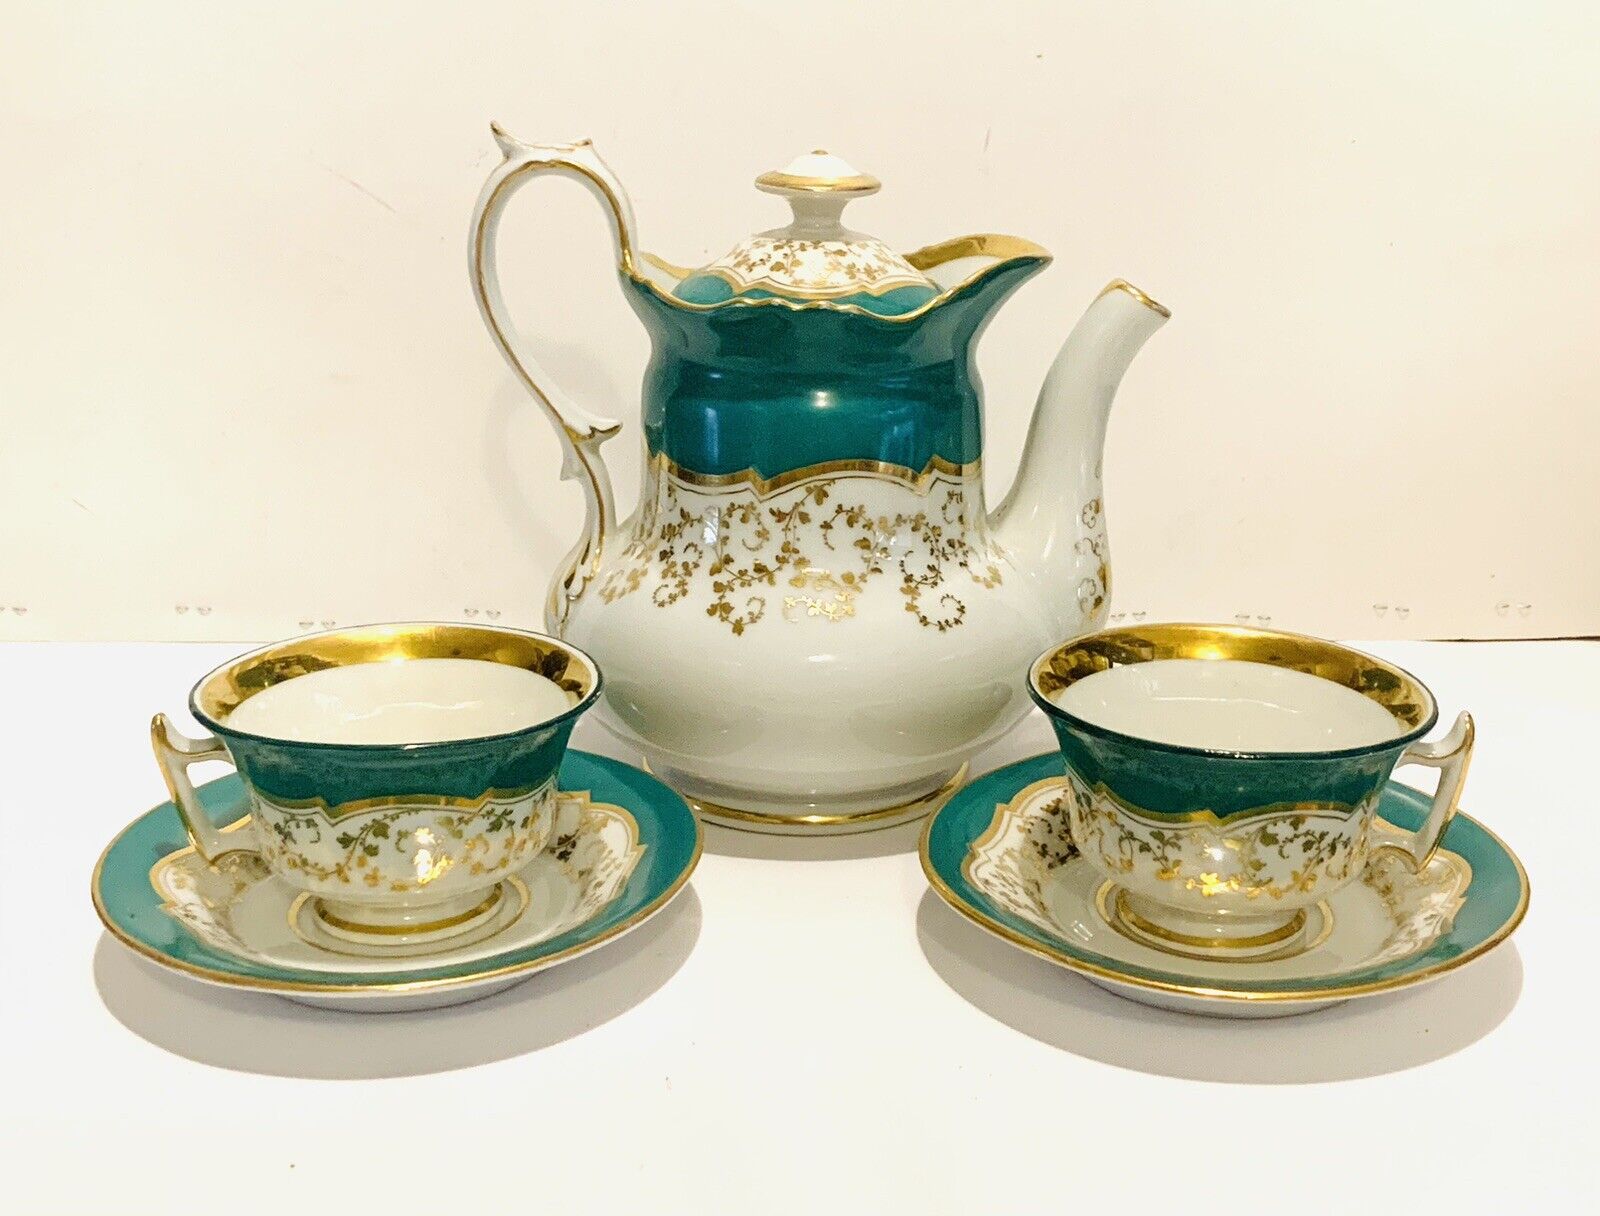 19th c. Empire Old Paris Porcelain Russian Green Gold Coffeepot & Cups c1825